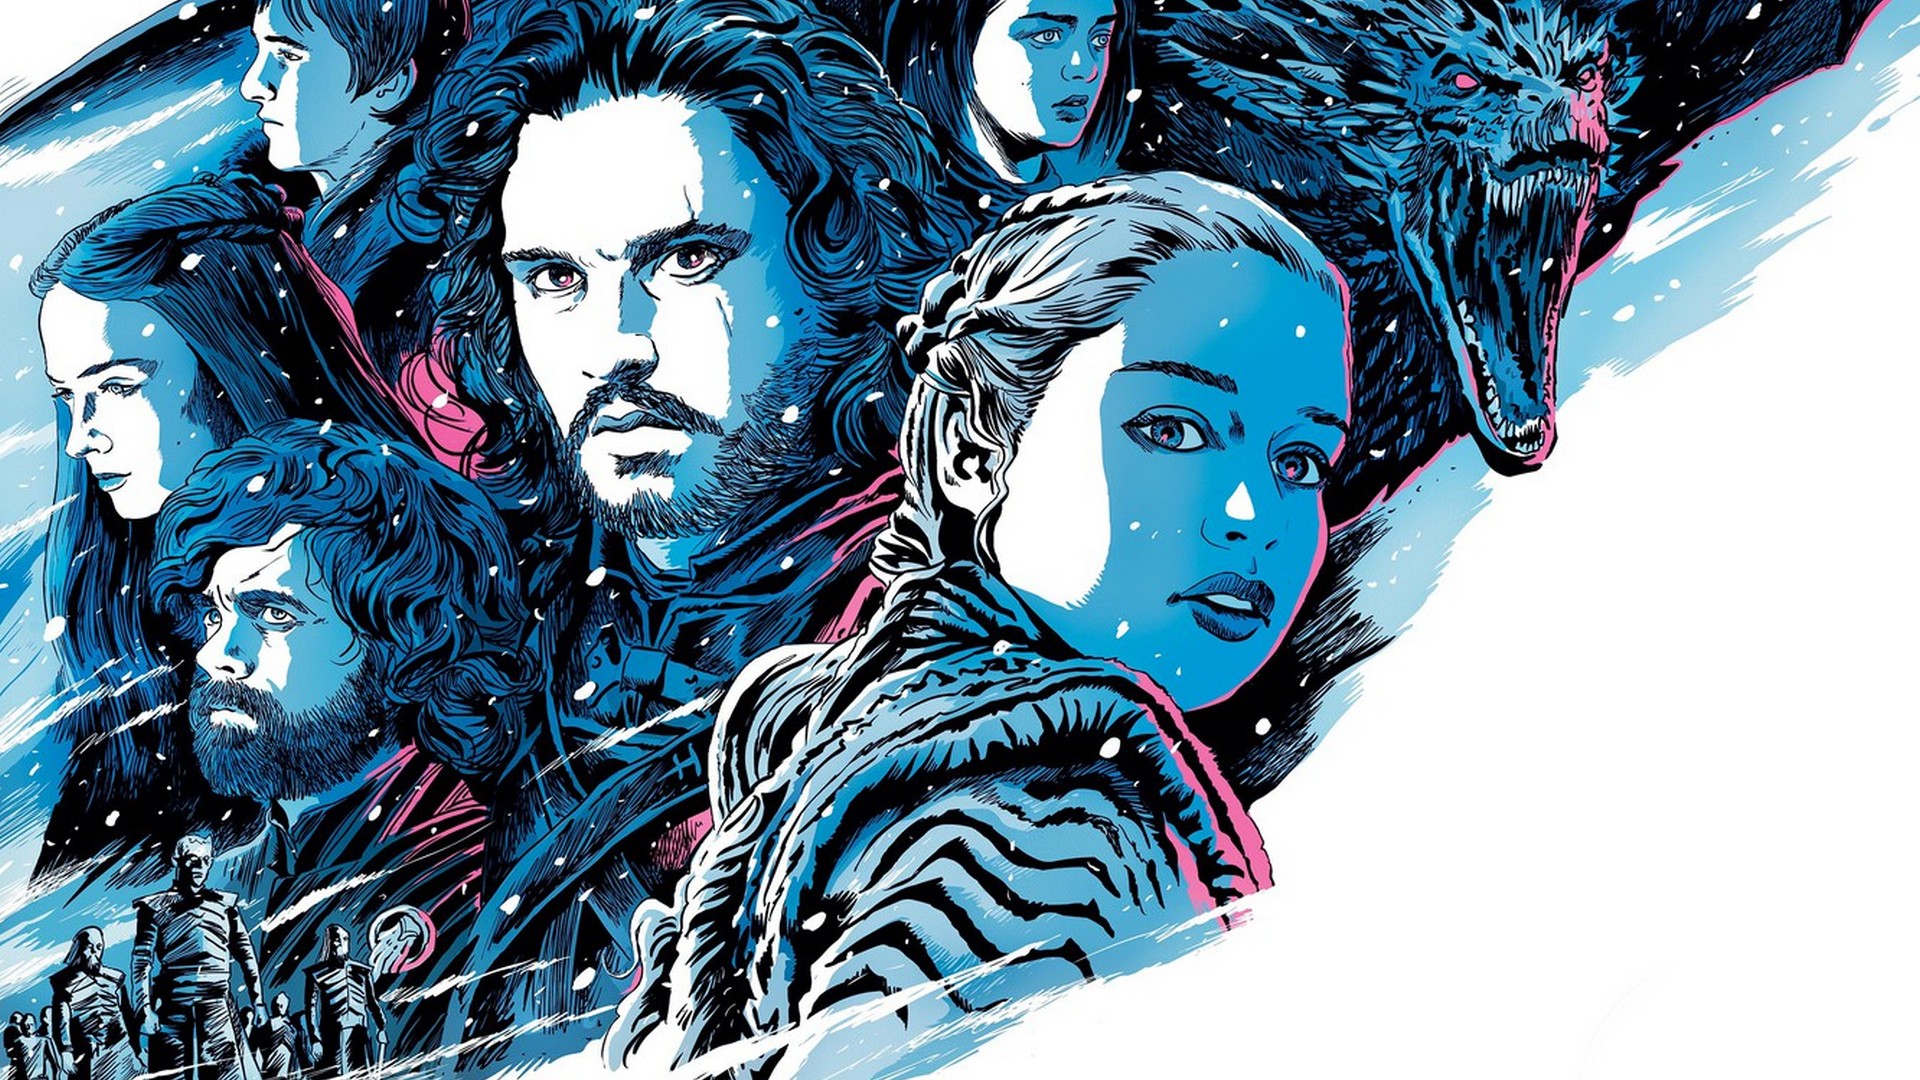 Wallpaper HD Game of Thrones 8 Season with high-resolution 1920x1080 pixel. You can use this wallpaper for your Desktop Computer Backgrounds, Mac Wallpapers, Android Lock screen or iPhone Screensavers and another smartphone device